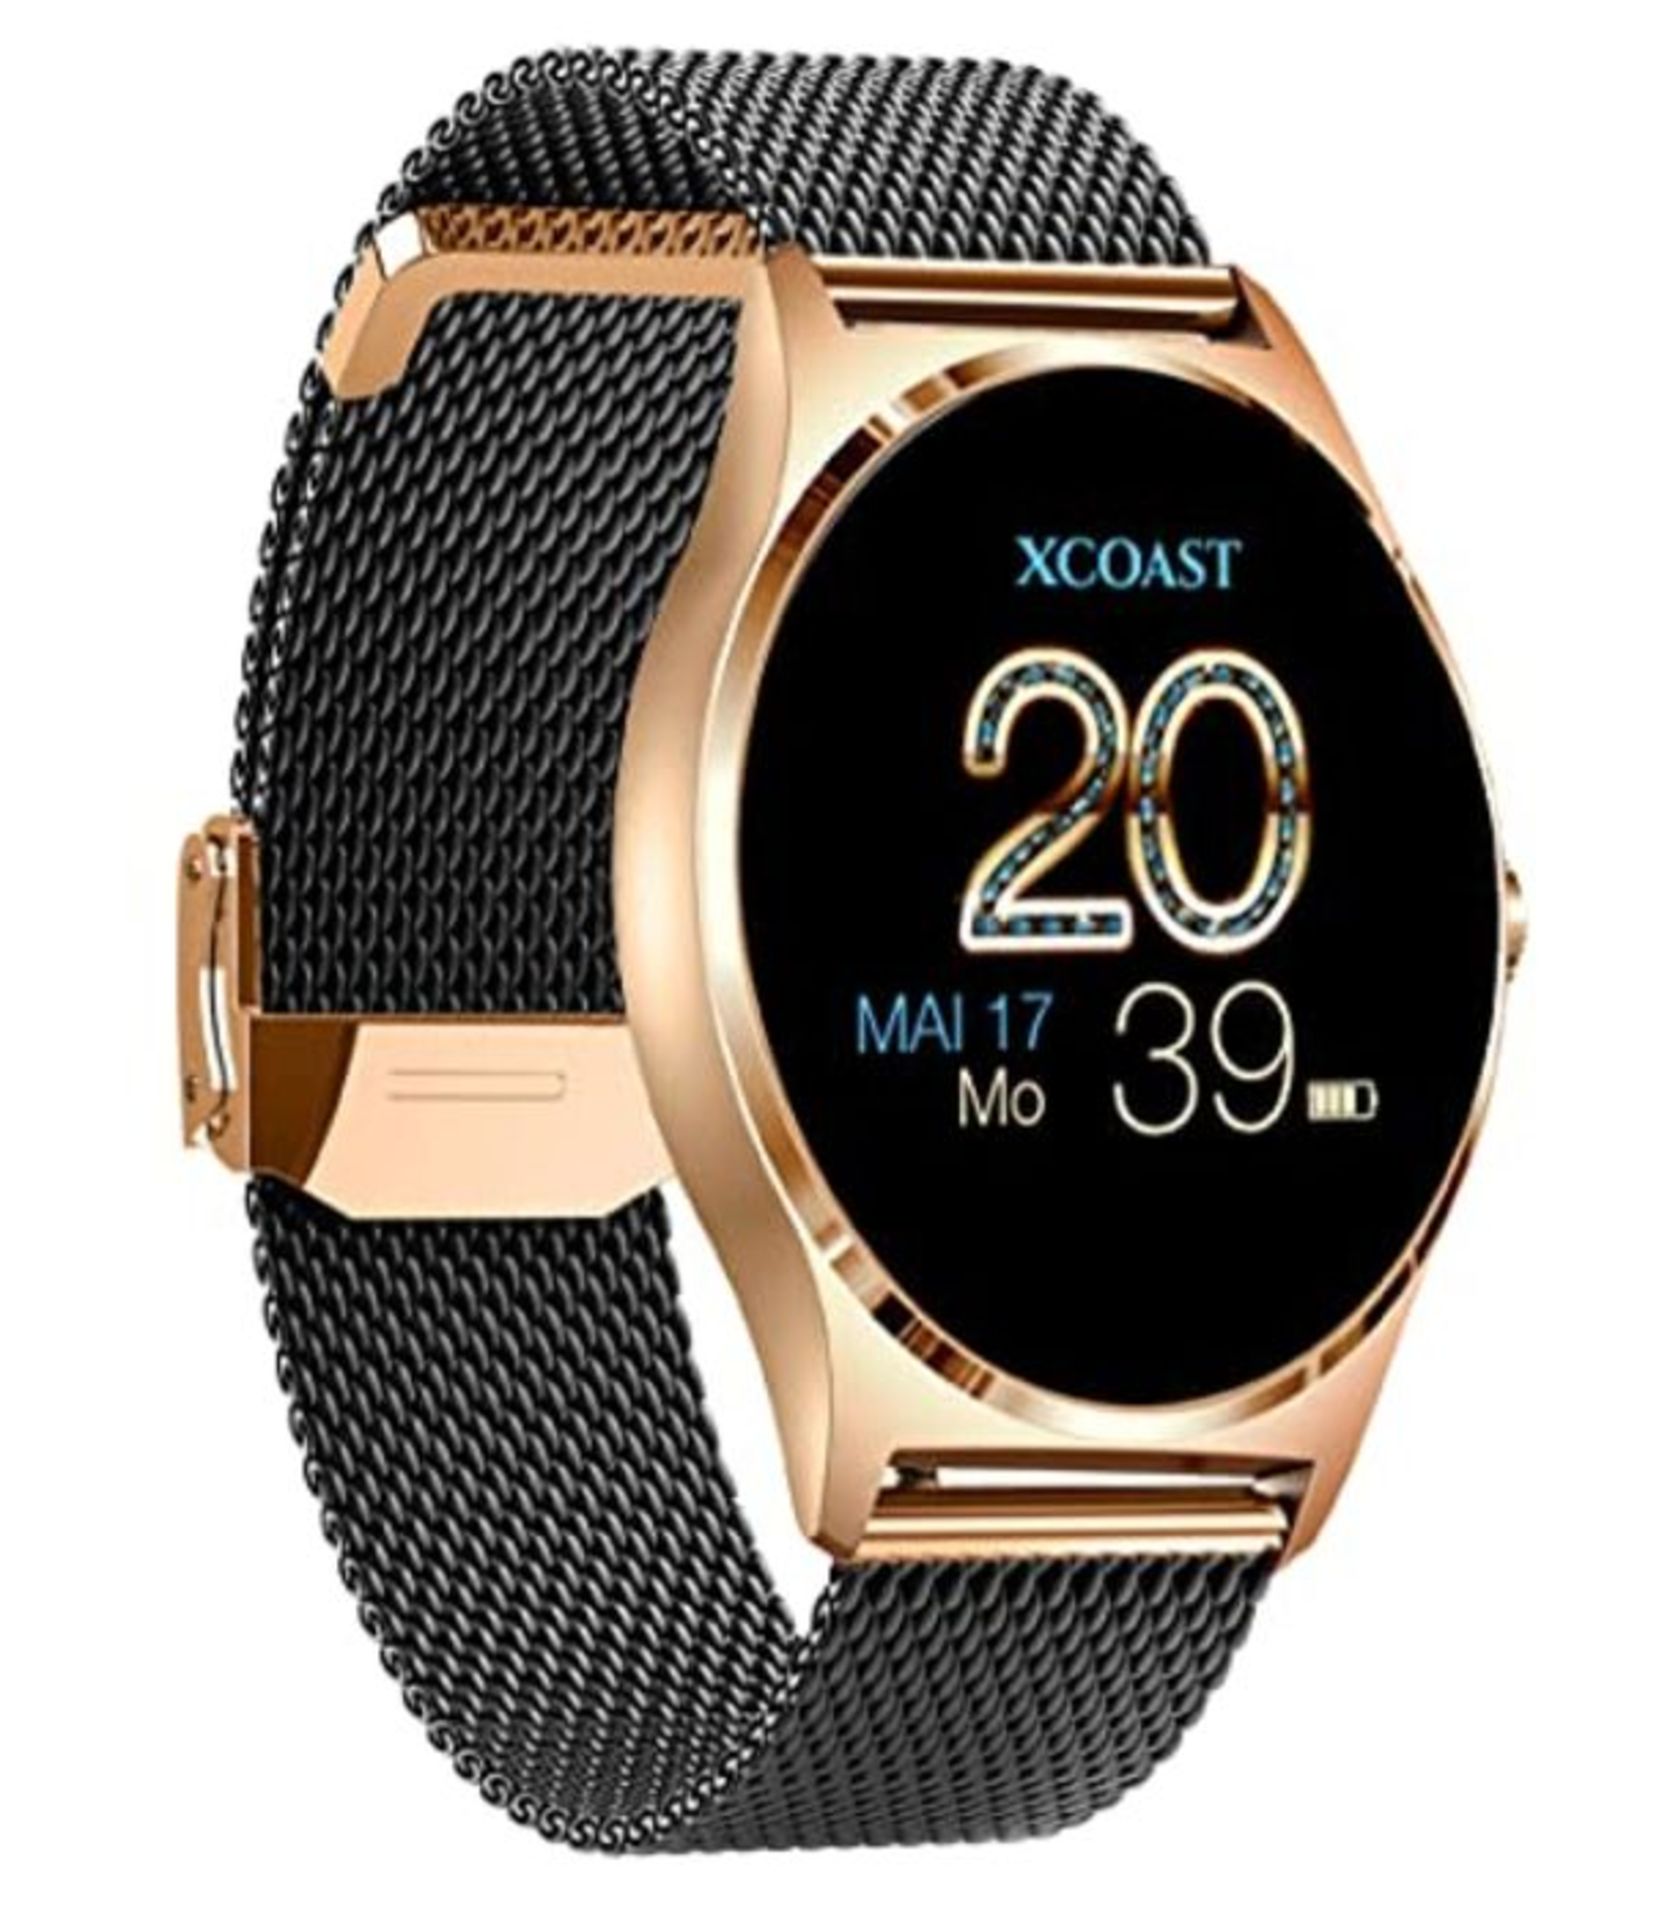 RRP £77.00 X-WATCH JOLI 2.0 XW PRO Smart watch for women iOS & Android - fashion watch/Full Touch - Image 4 of 6